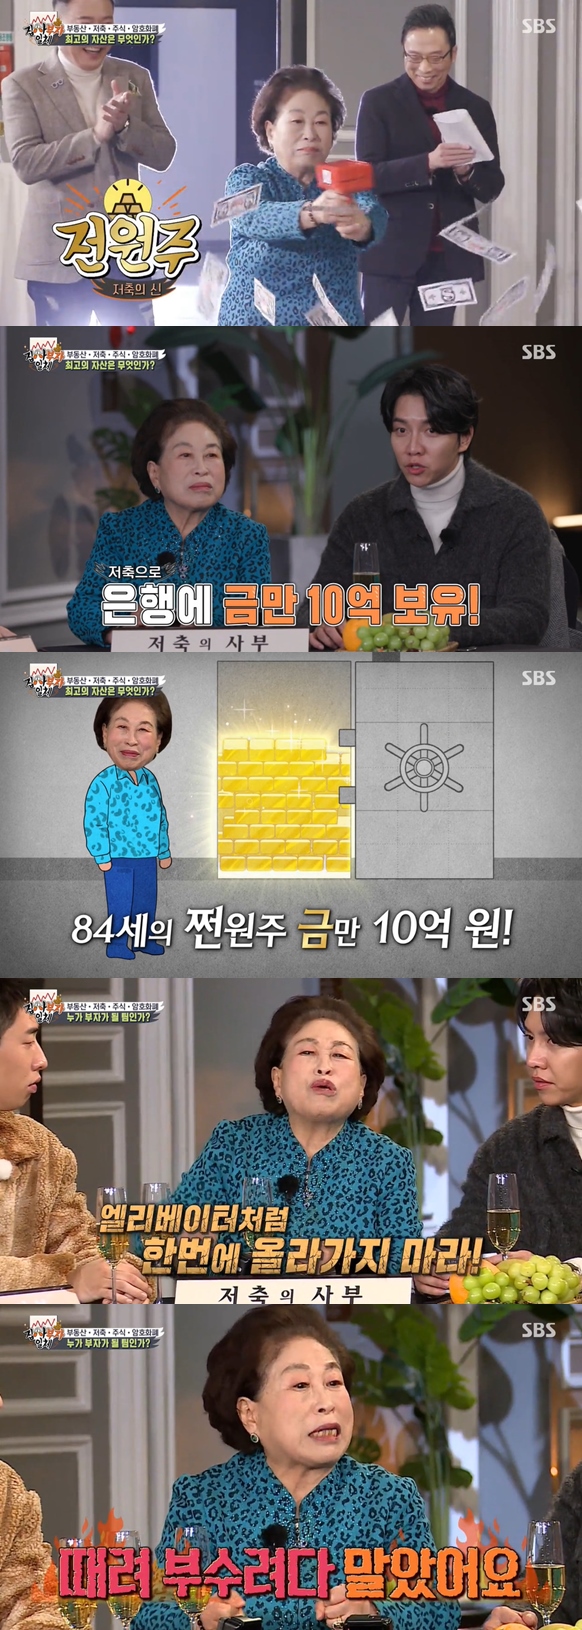 In SBS All The Butlers broadcast on the 16th, a millionaire club was held and each master gathered to talk about assets.Lee Seung-gi told the master of the savings that the money is worth 1 billion won.I just bought gold if I got money, I bought it, I put gold in the safe, and I collected a little bit of dust and collected a little bit of money, so I collected about 1 billion won.The gold is hot, it is strong if you have it. It is not heavy because it is money even if it is heavy, he said. You want to be rich all year, do not you?I should not be too greedy, said Jeon, who listened to the story of the cryptocurrency master. I do not invest in dangerous things.Its my money to go up one step at a time, not go up like an elevator, but sweat one step at a time. The money I save is hard as the ground is hard.I still care about it and I take the bus on the train. When I get in a taxi, the fare is approaching and I think it is a bullet shot.One day my son came in the Red Car. I tried to break it down. Do not bluff, you have to gain inner flesh. It is easy to blow it up when you go up. There is no concern about flying, he said.In addition, Jeon said, It is fun to collect more than fun to write. I do not like to write.The powerhouse then unveiled the extreme saving house: (The mother-in-laws wardrobe) is what it brought when she comes to marriage. It also gives a tissue as a gift for opening.I leave it out in the sheet because I want to write it. I write it twice and write it three times. When it is cold, turn the boiler for an hour. When it gets lukewarm, it turns off, he surprised everyone.I didnt force it, but I saved it (in my body), Jeon Won-ju said, turning off the lights even during the shoot.My grandchildren came and said I could not see them going to the bathroom, so I said, Stutter.Once, the electricity tax came out too little, so I thought it was wrong and I came out. The power supply collected the water washed by the hand, used it for cleaning the toilet, and collected the eyelashes for the makeup and recycled them.Photo: SBS broadcast screen